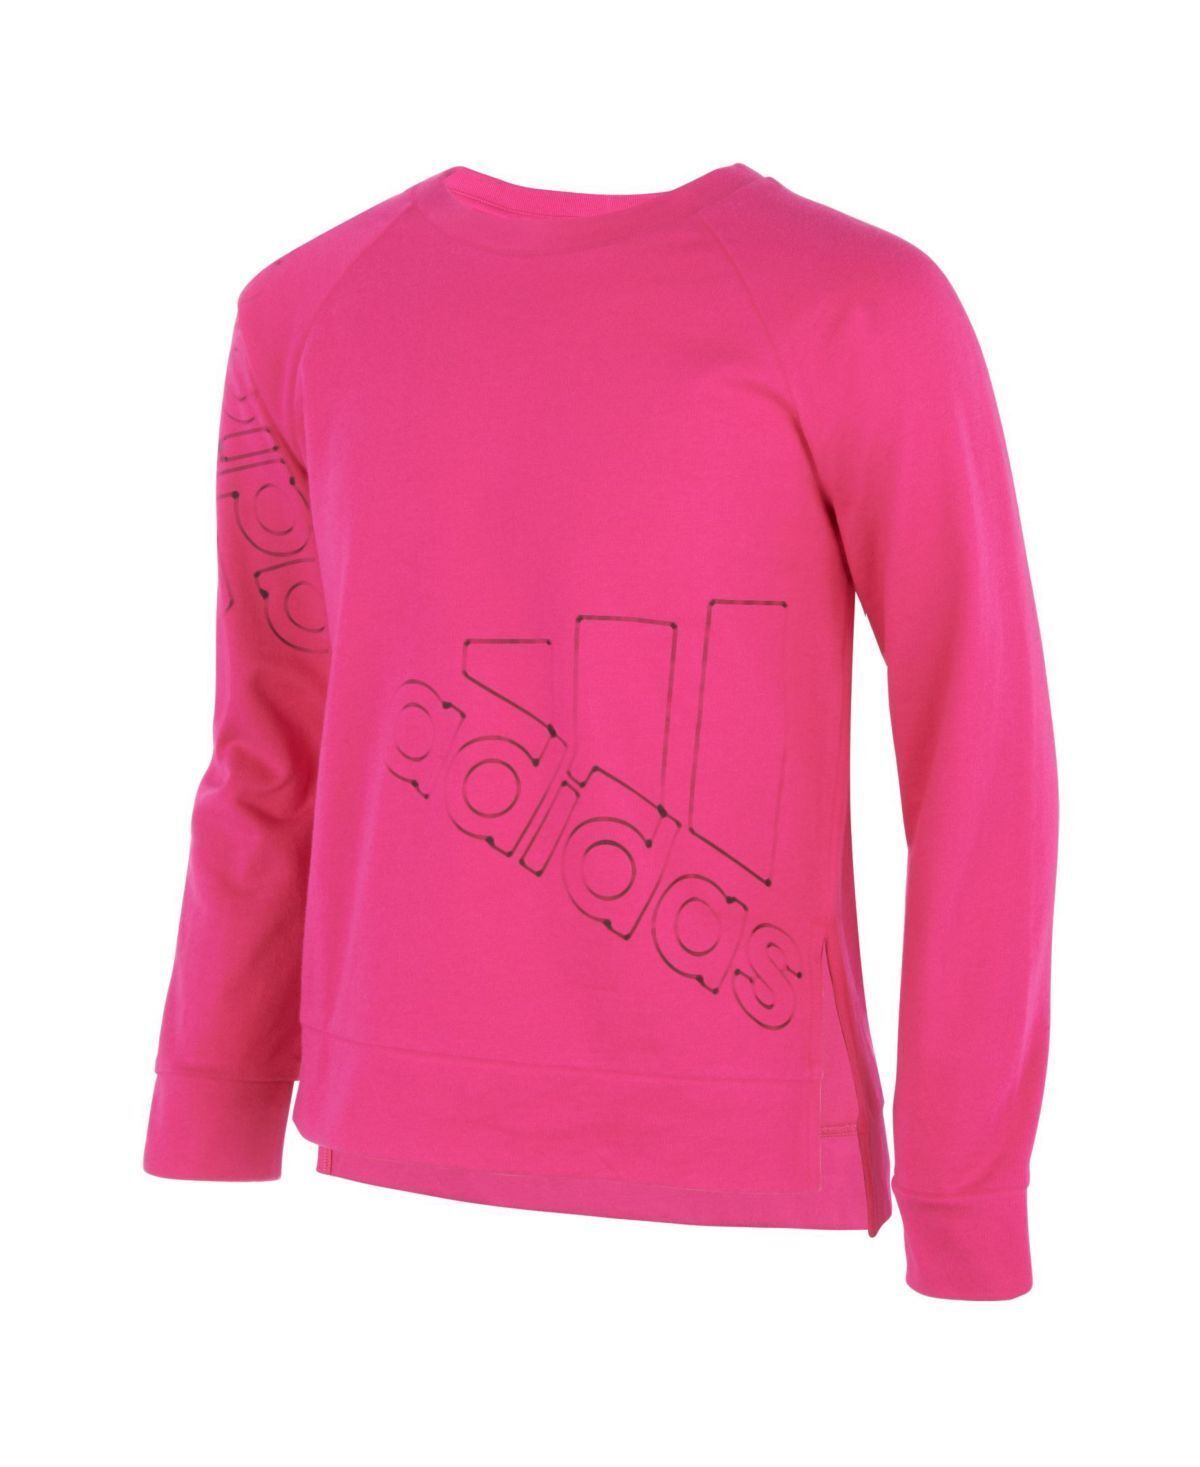 Primary image for adidas Big Girls Long Sleeve French Terry Crewneck Top,Real Magenta,X-Large